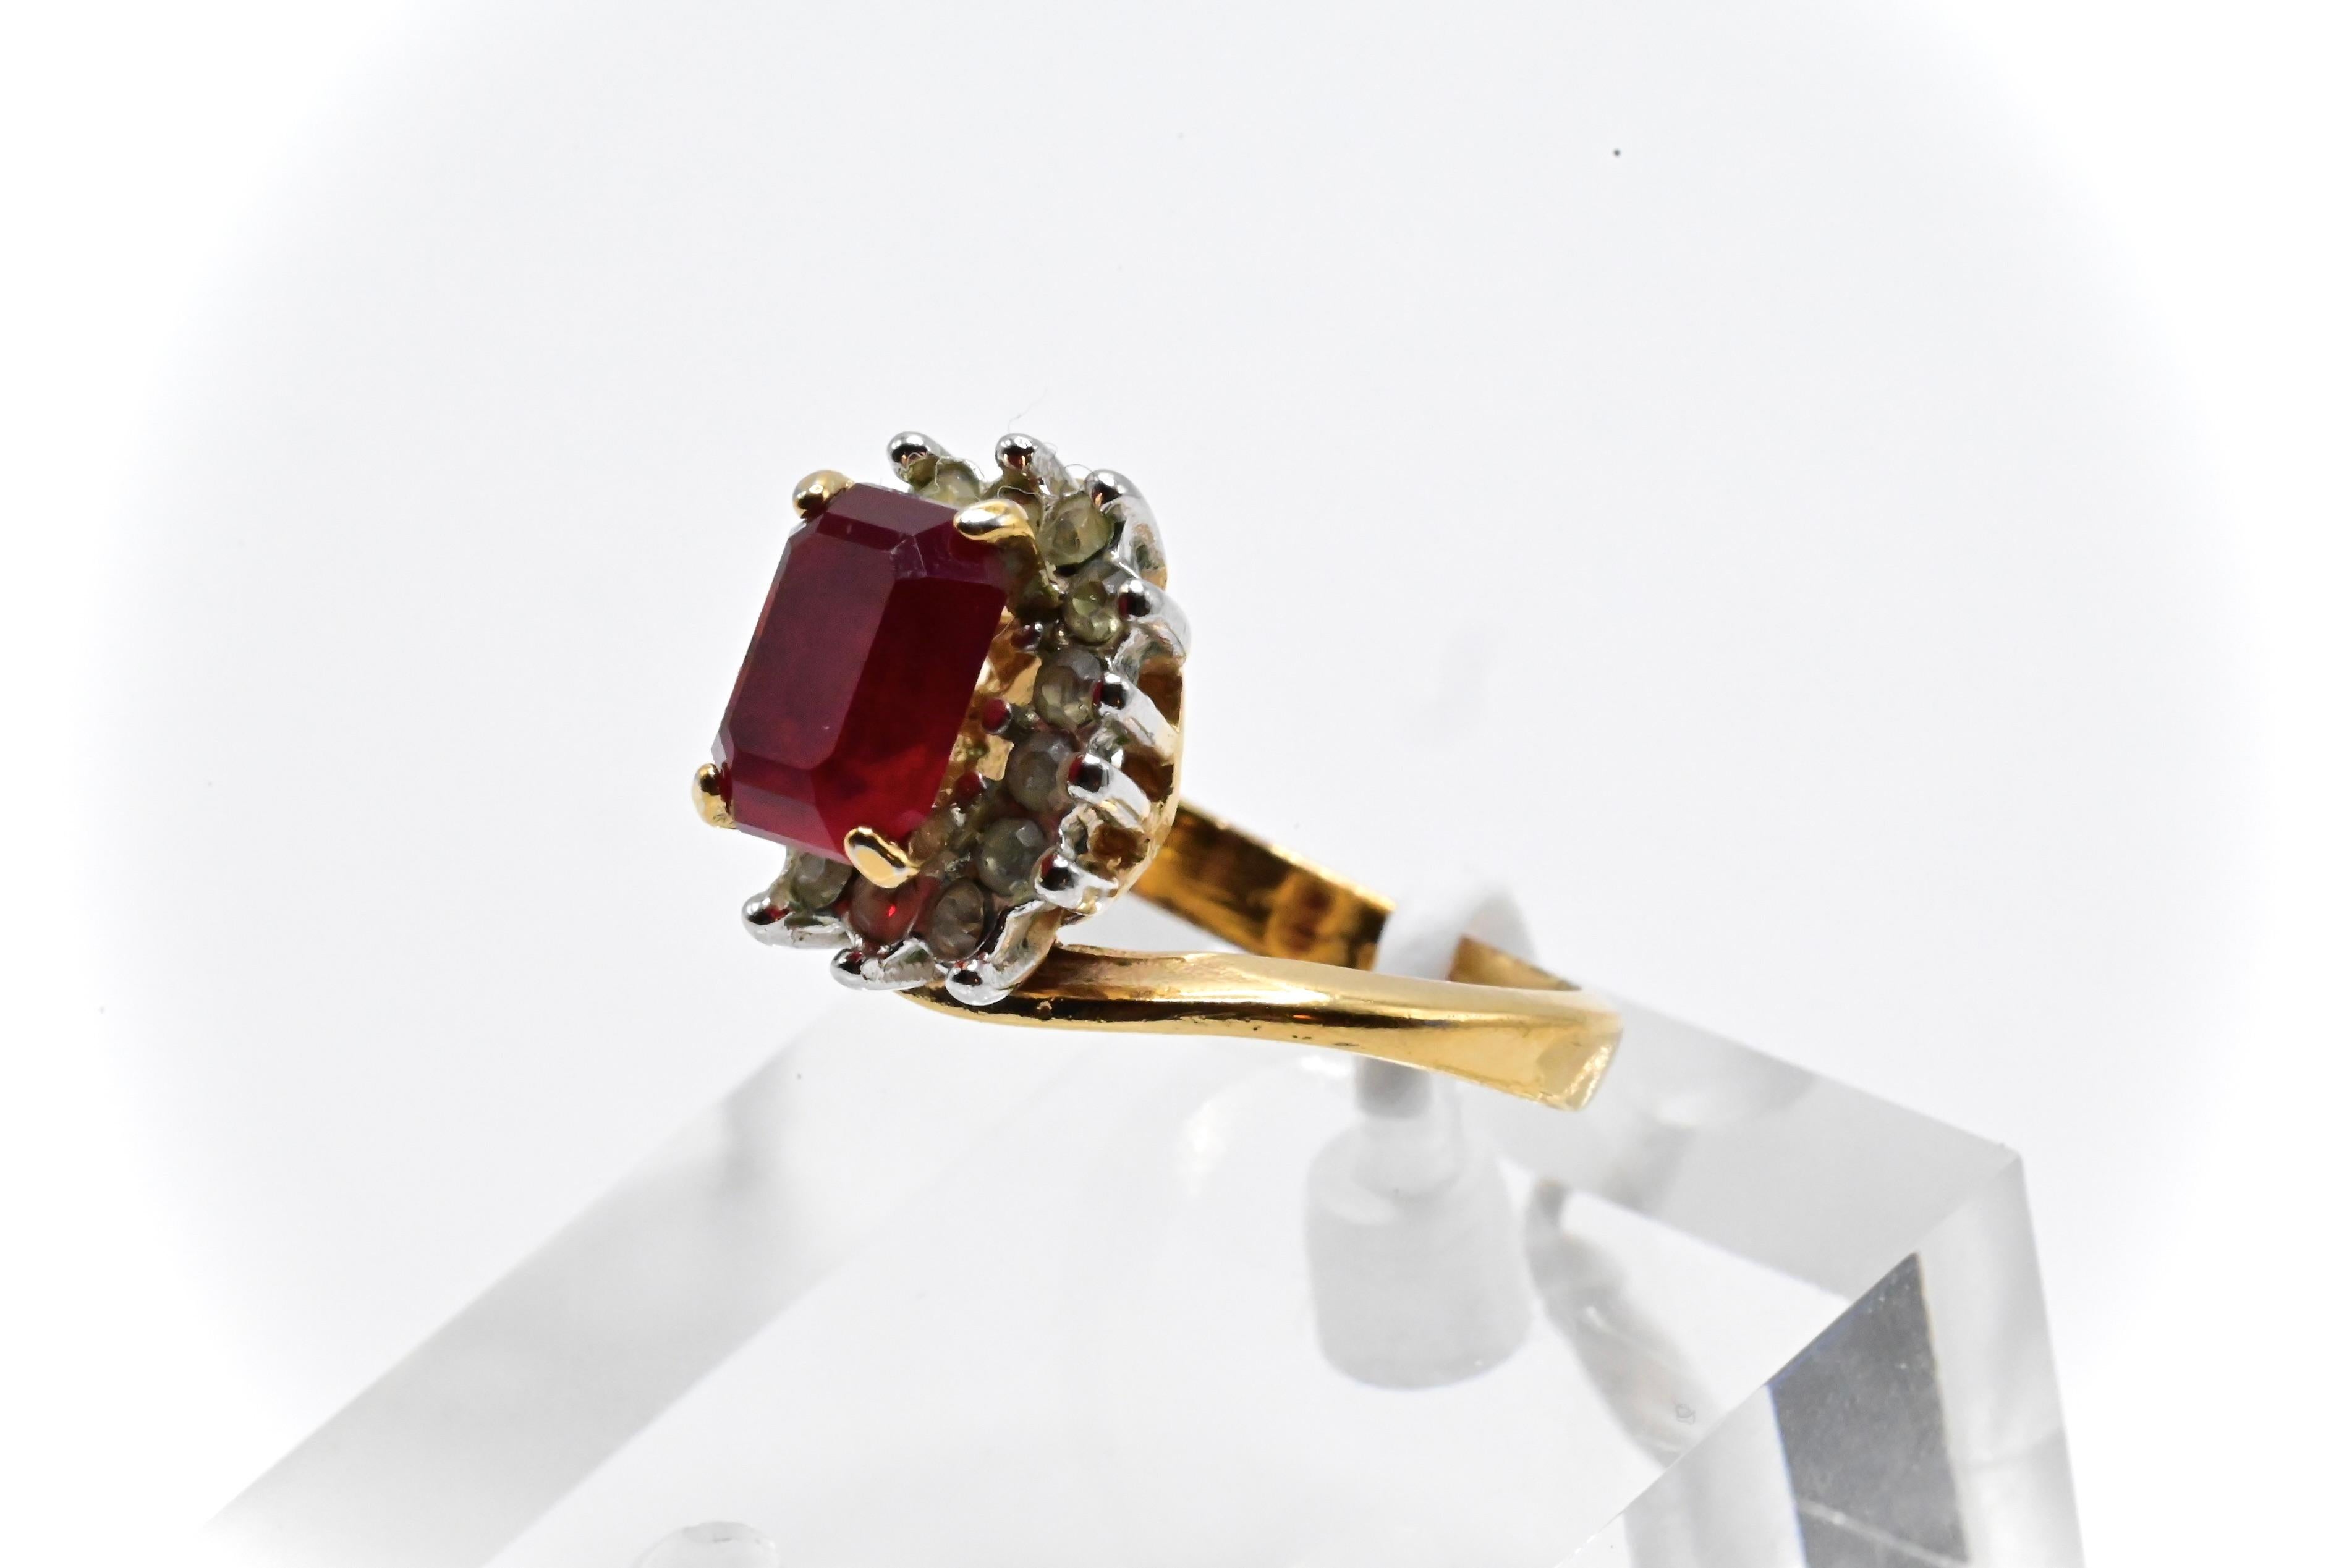 This is an elegant 18k yellow gold & emerald cut garnet ring with a beautiful deep red color. The ring has diamonds placed around the gemstone, and It’s in good condition with wear due to age and use. It’s a size 4 1/2, and weighs 3 grams. If you